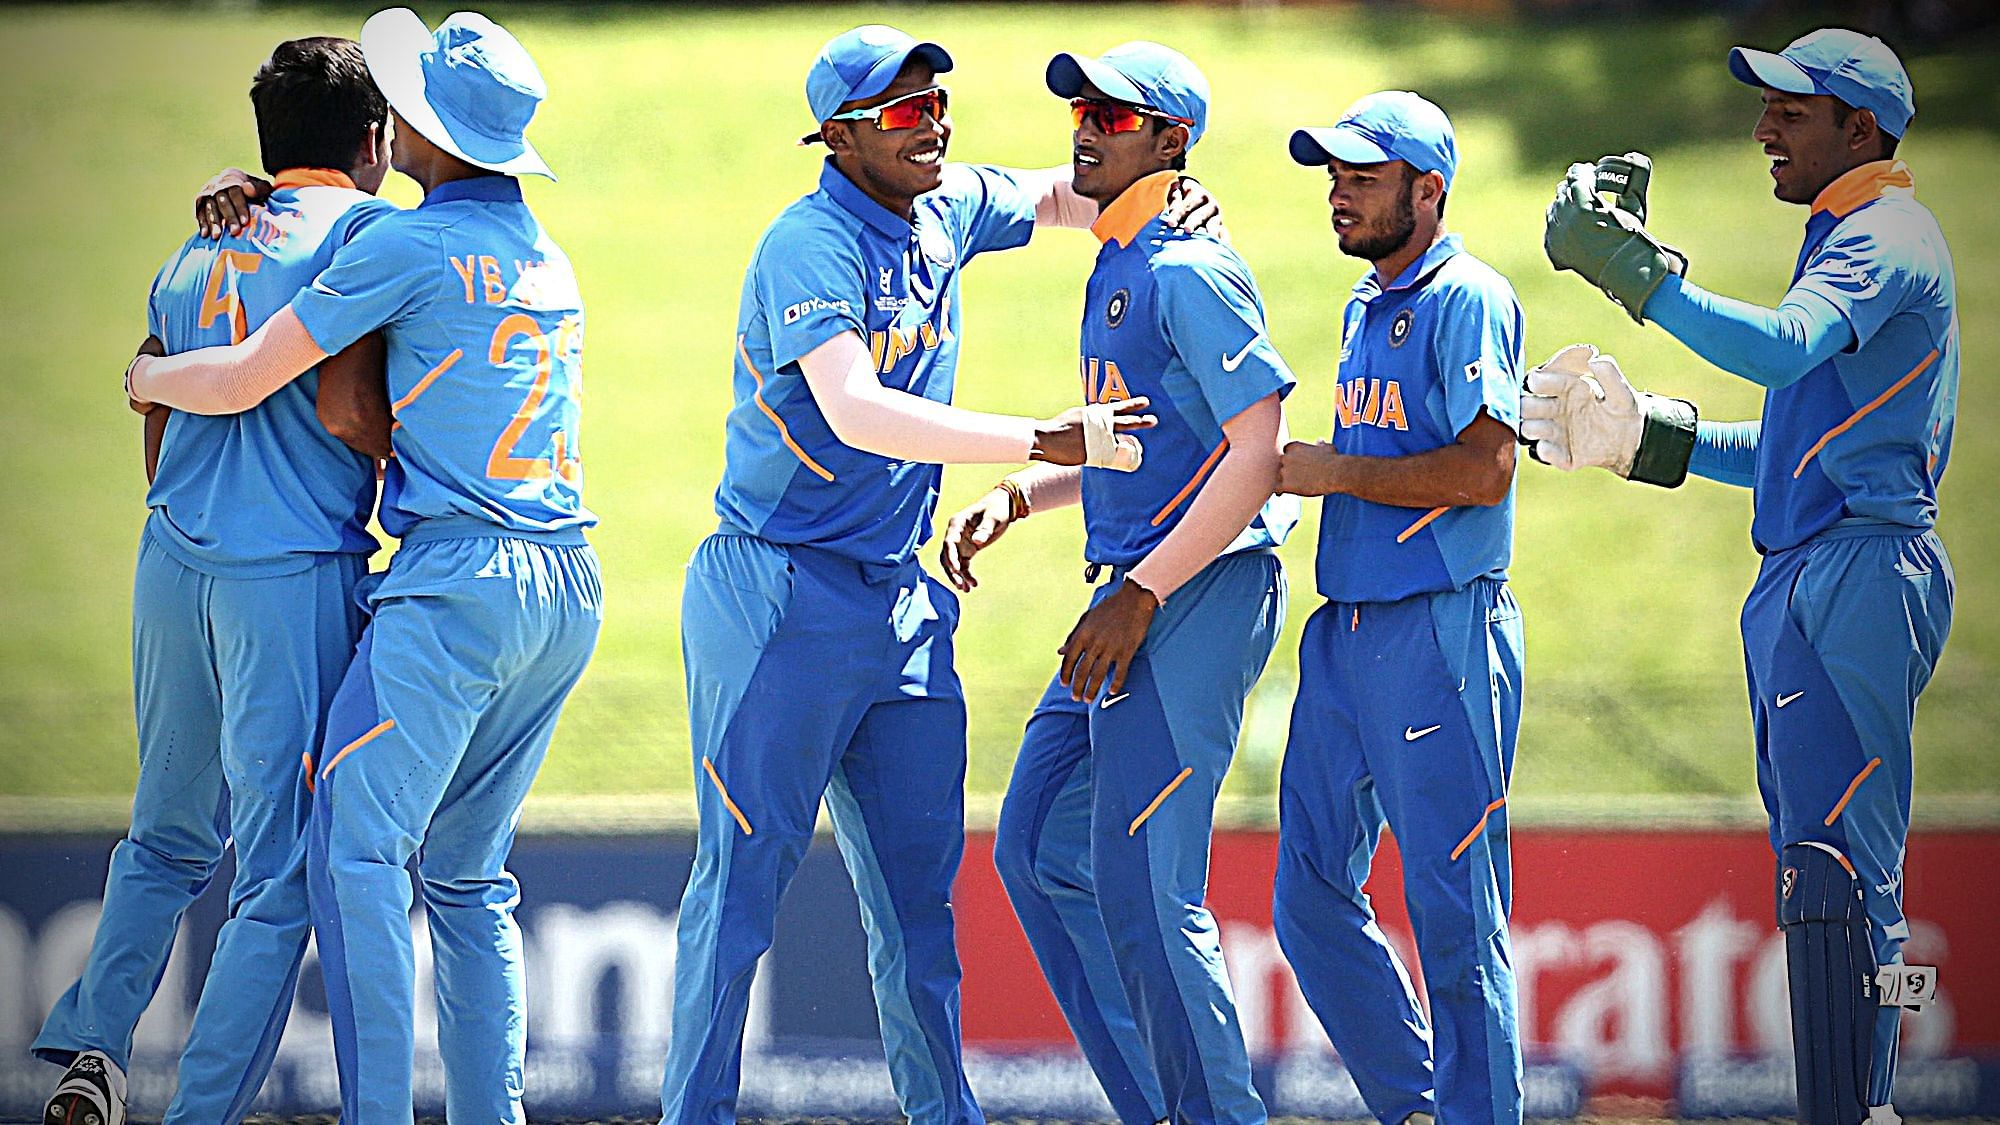 India defeated Pakistan by 10 wickets to enter the finals of the ICC Under-19 World Cup 2020 in South Africa.